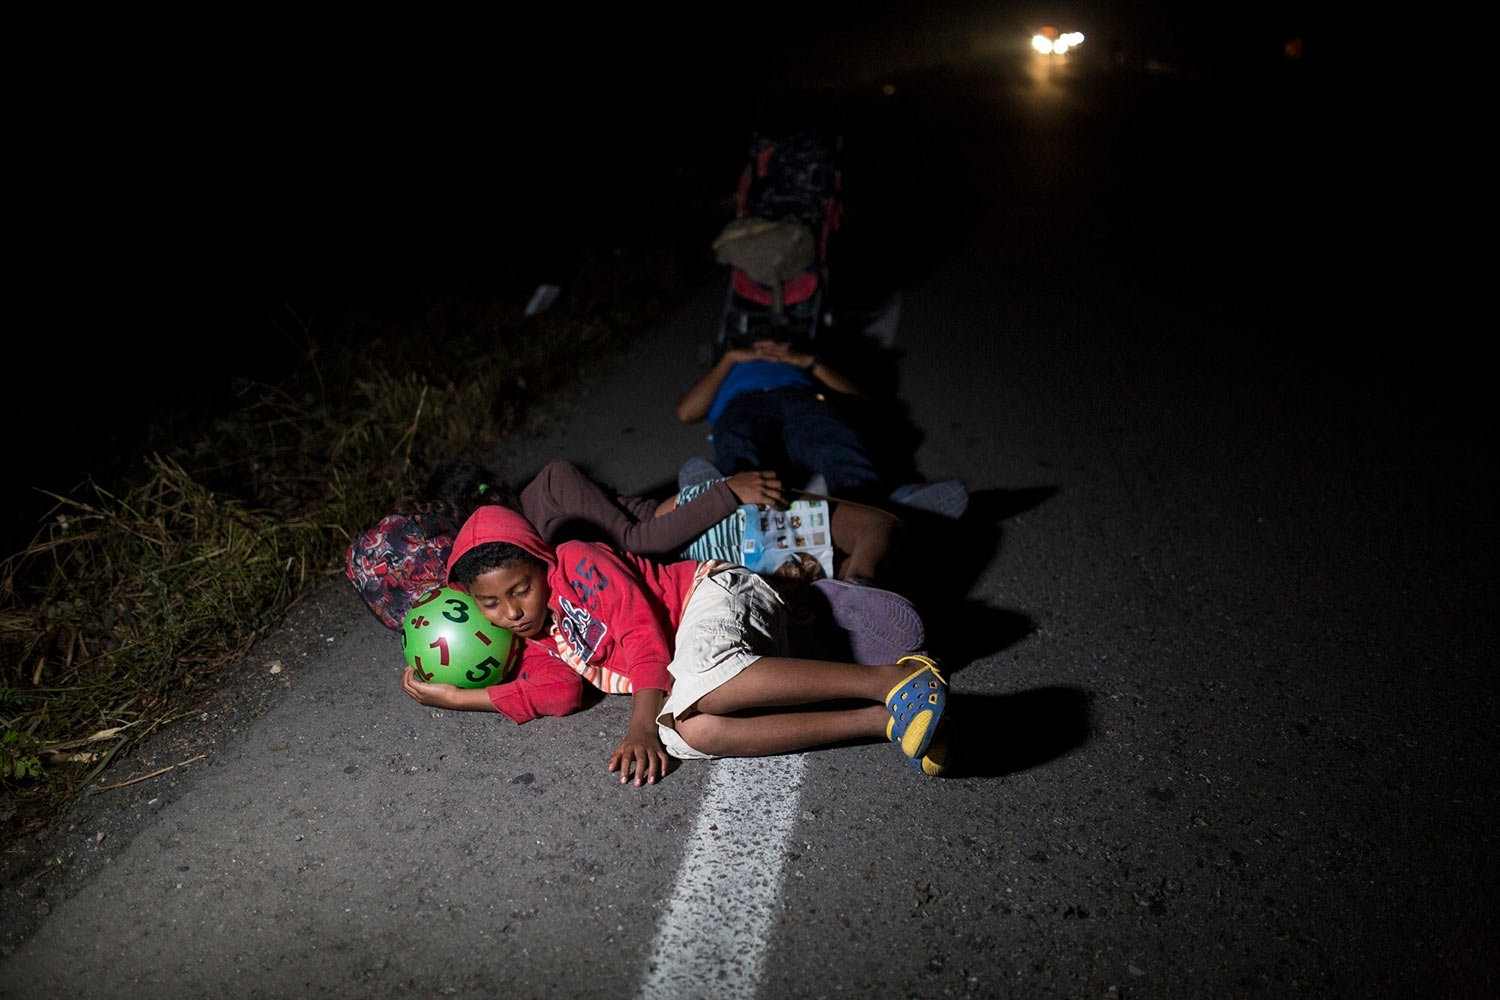  Jason, 11, sleeps using a toy ball as pillow during a break from walking early morning on the road that connects Pijijiapan with Arriaga, Mexico, on Oct. 26, 2018. (AP Photo/Rodrigo Abd) 